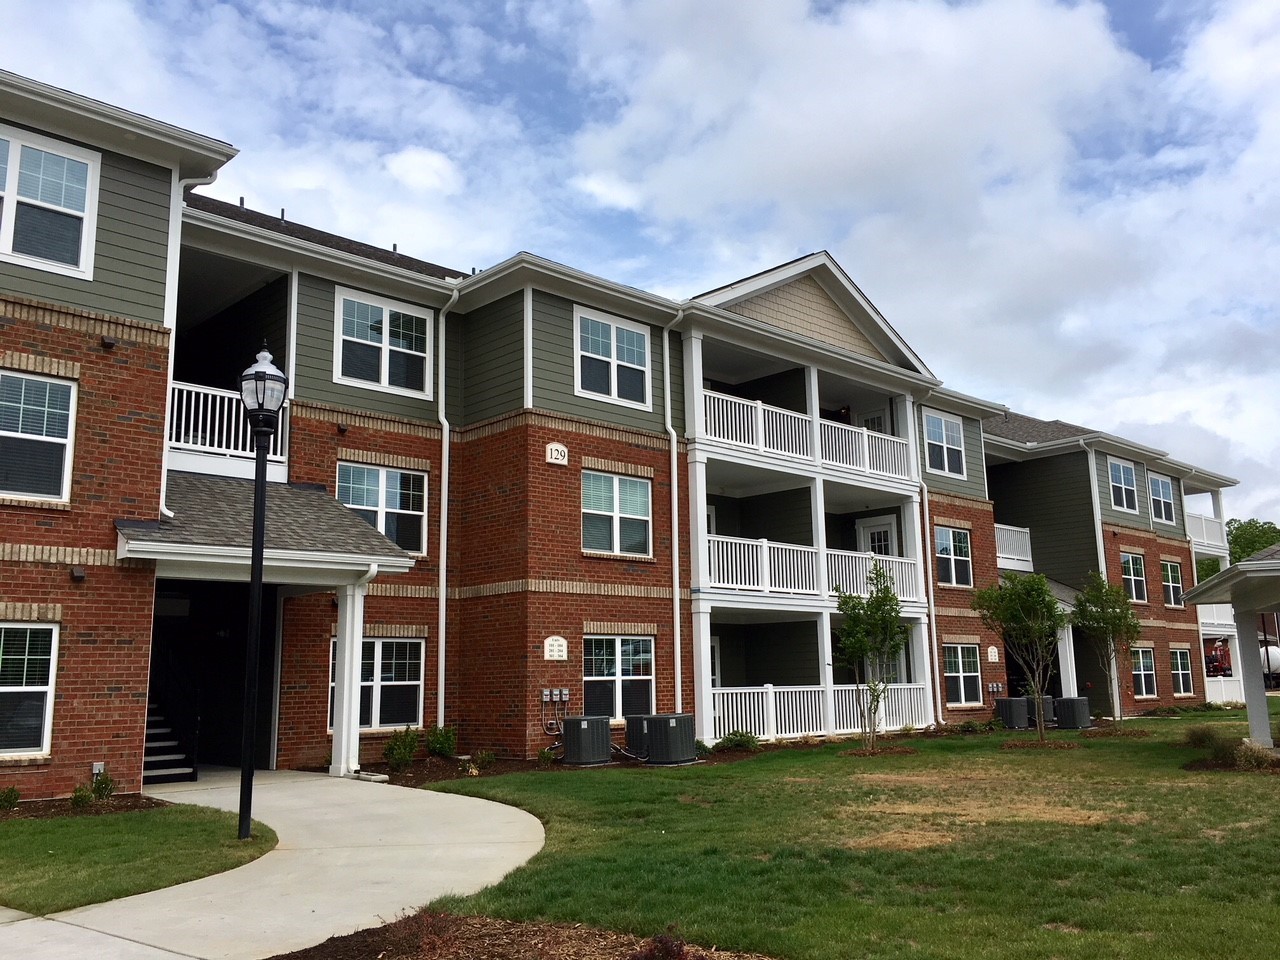 Photo of PARKSIDE AT BETHEL. Affordable housing located at 130 ROCKFORD WAY CLOVER, SC 29710